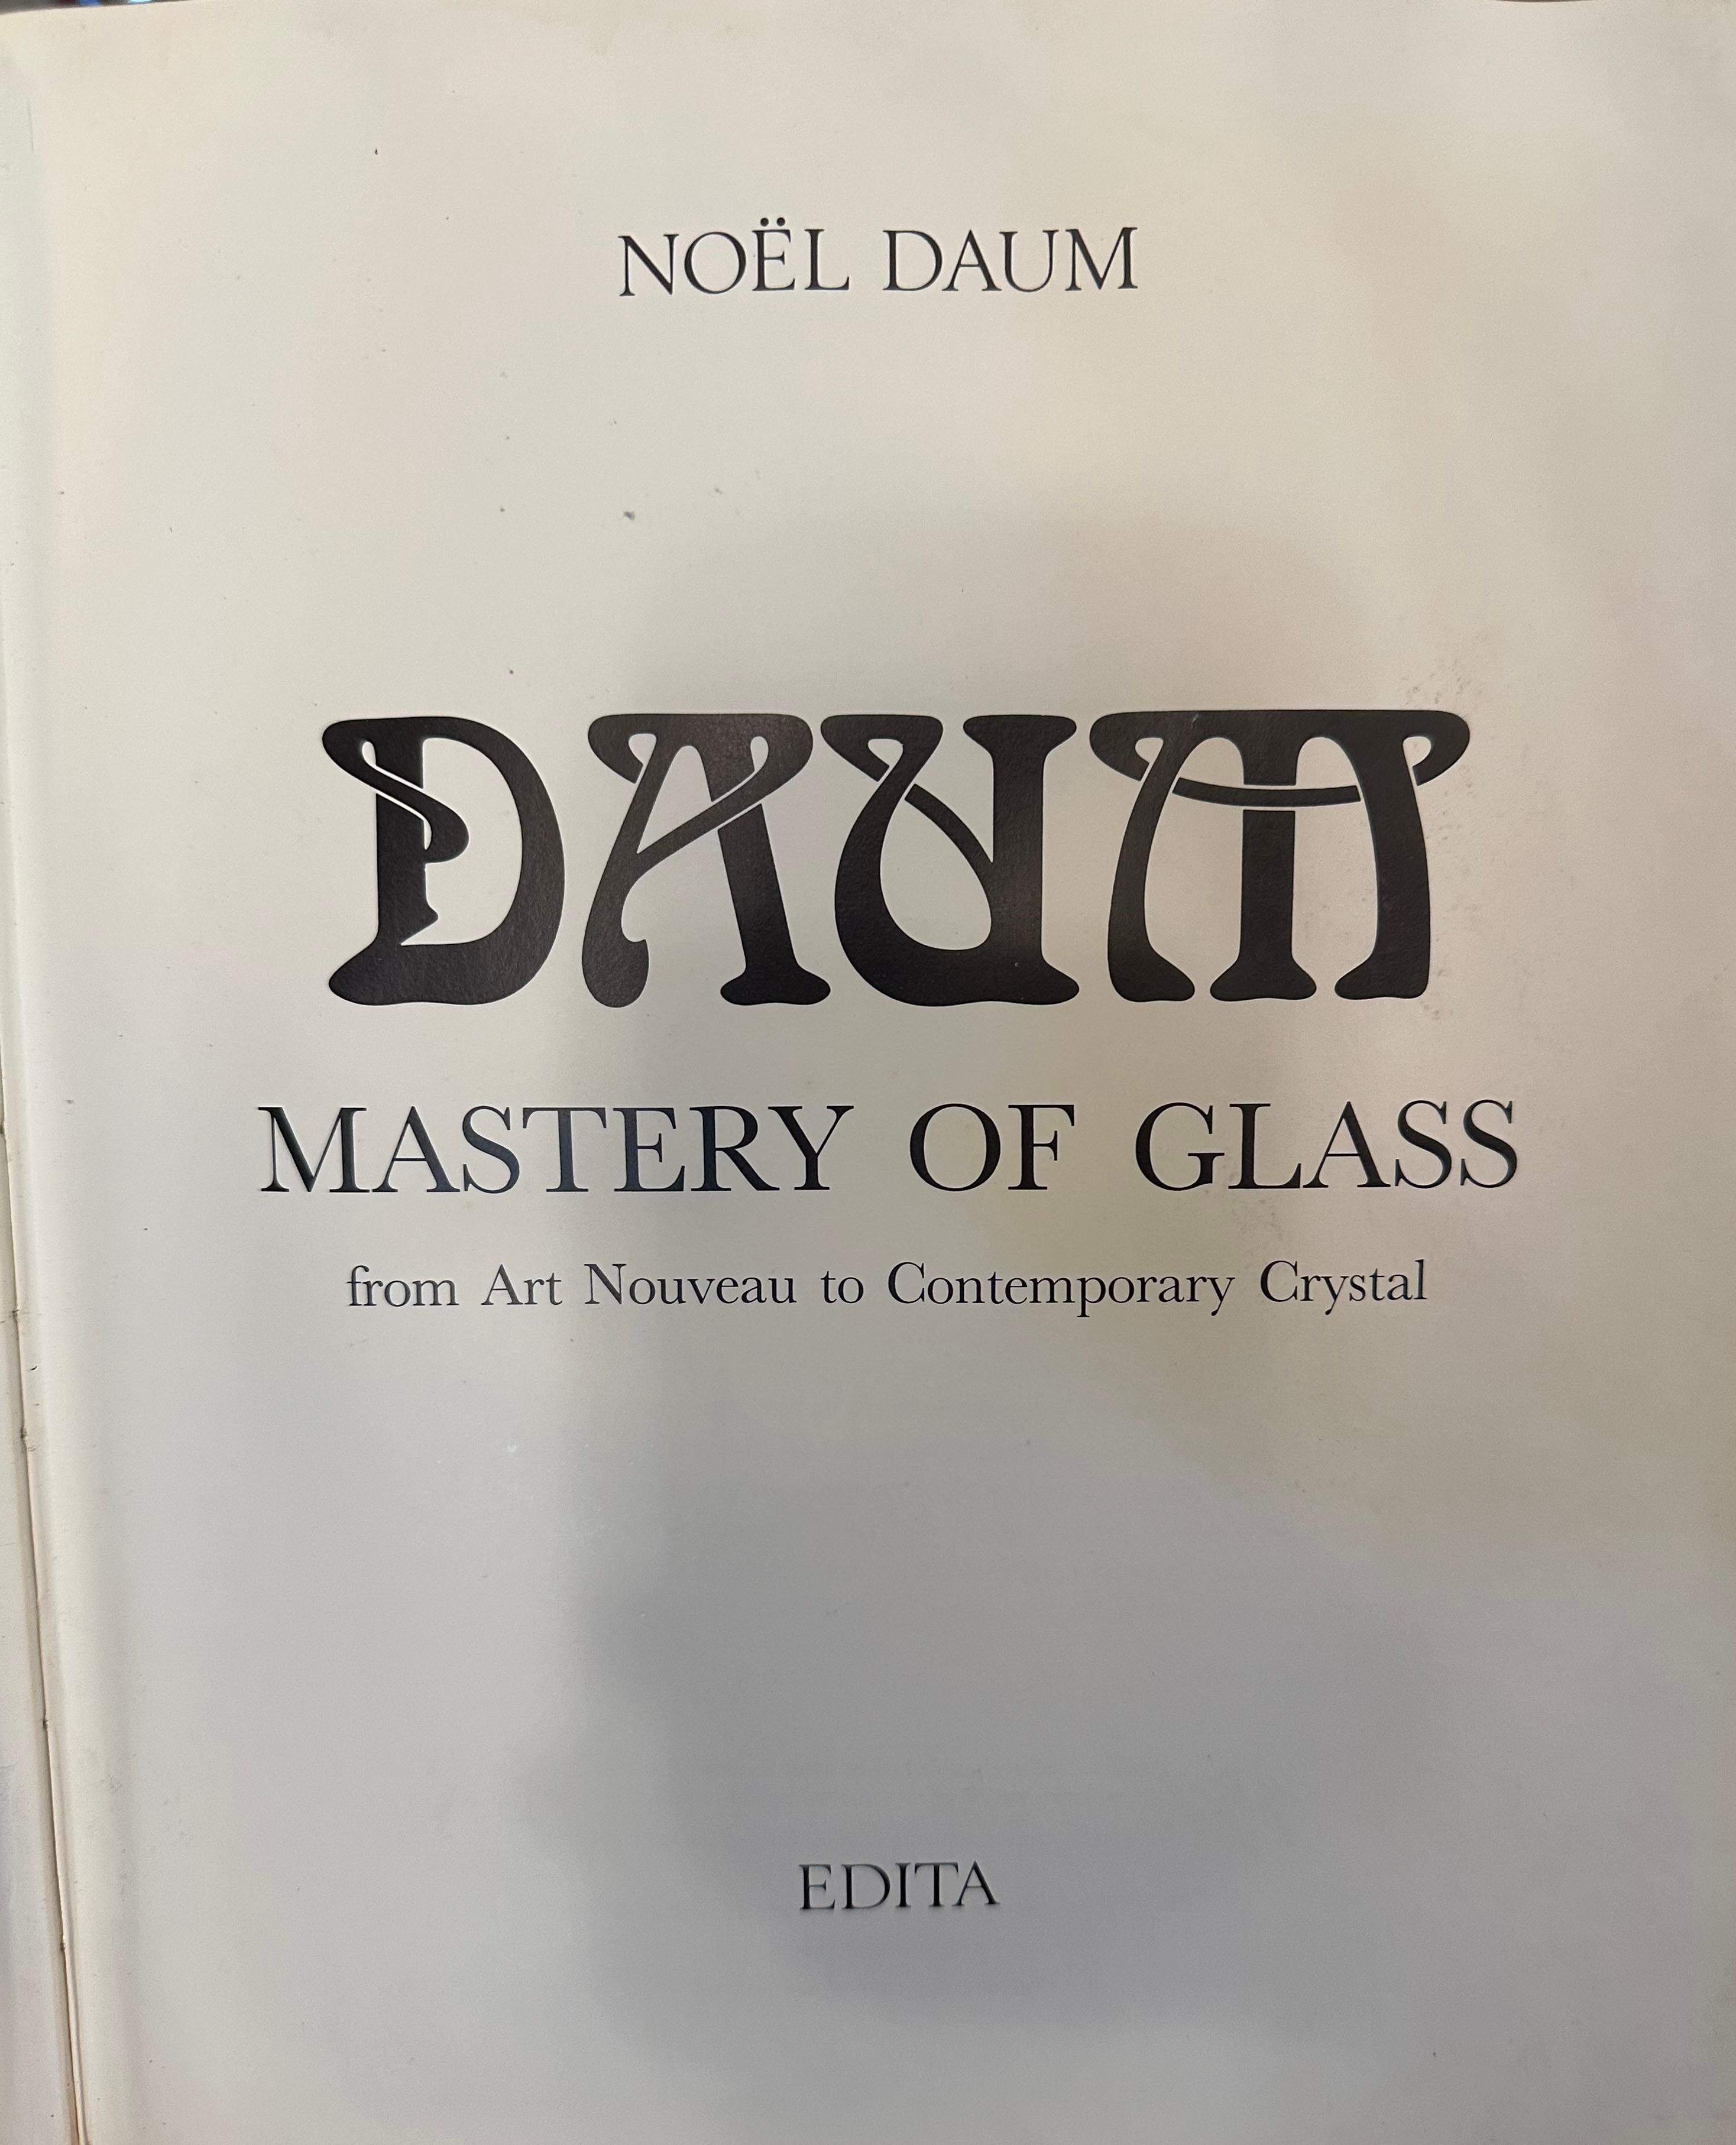 Sign: Daum Nancy 
glass with applications
Daum is the name of a factory established in 1875 in the city of Nancy, France. When the notary Jean Daum became the owner of an industrial furnace, that of Nancy Glass, to expropriate the owners who were